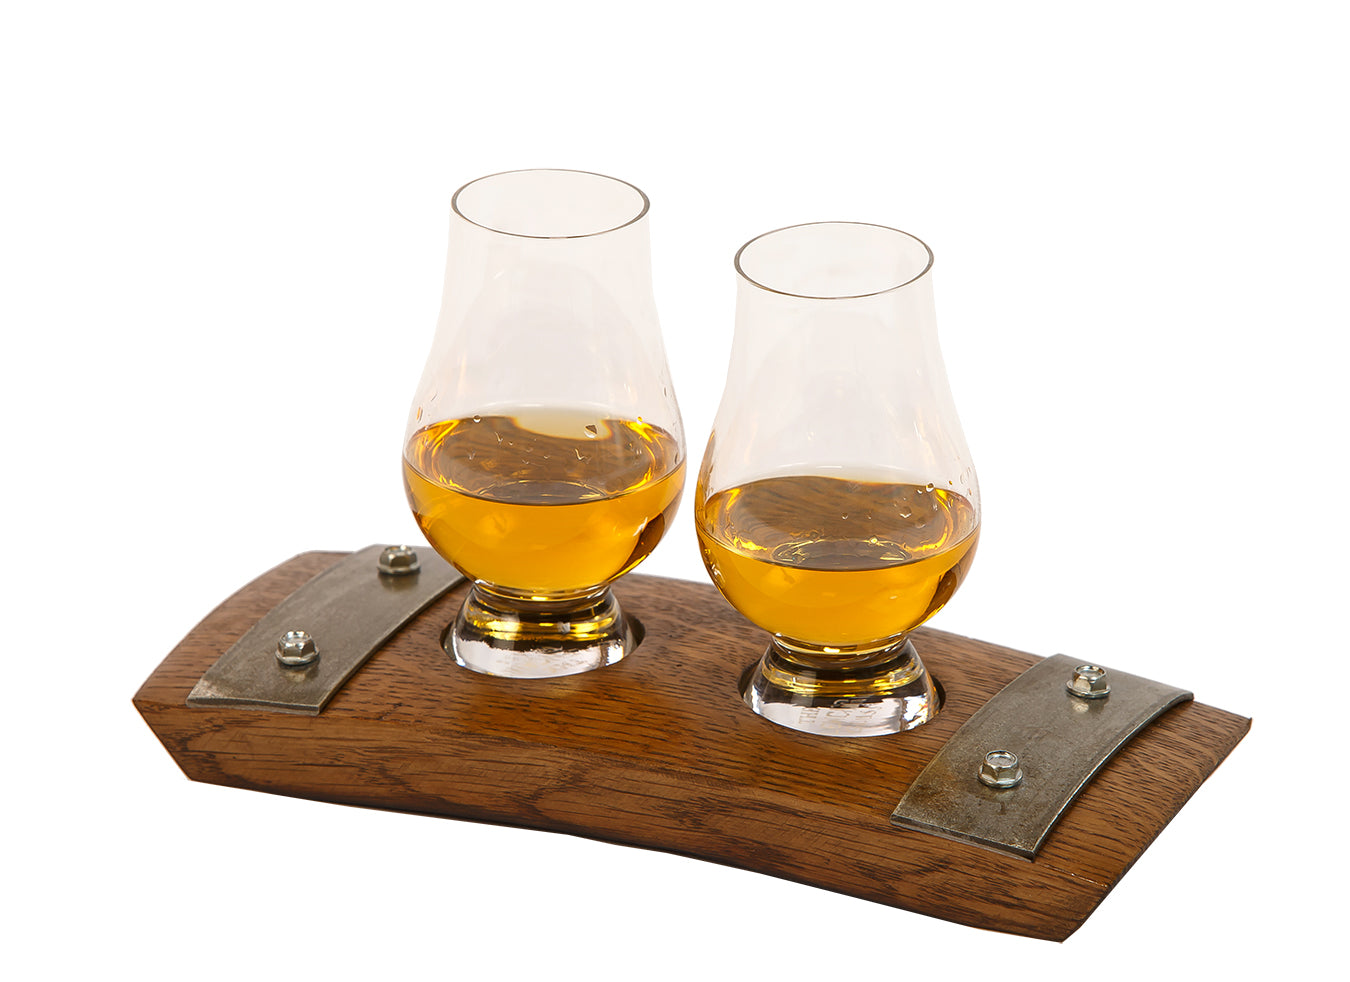 Oak & Olive - Picnic Plus Double Whiskey - Glencarin Set & Whiskey Stave available at The Good Life Boutique